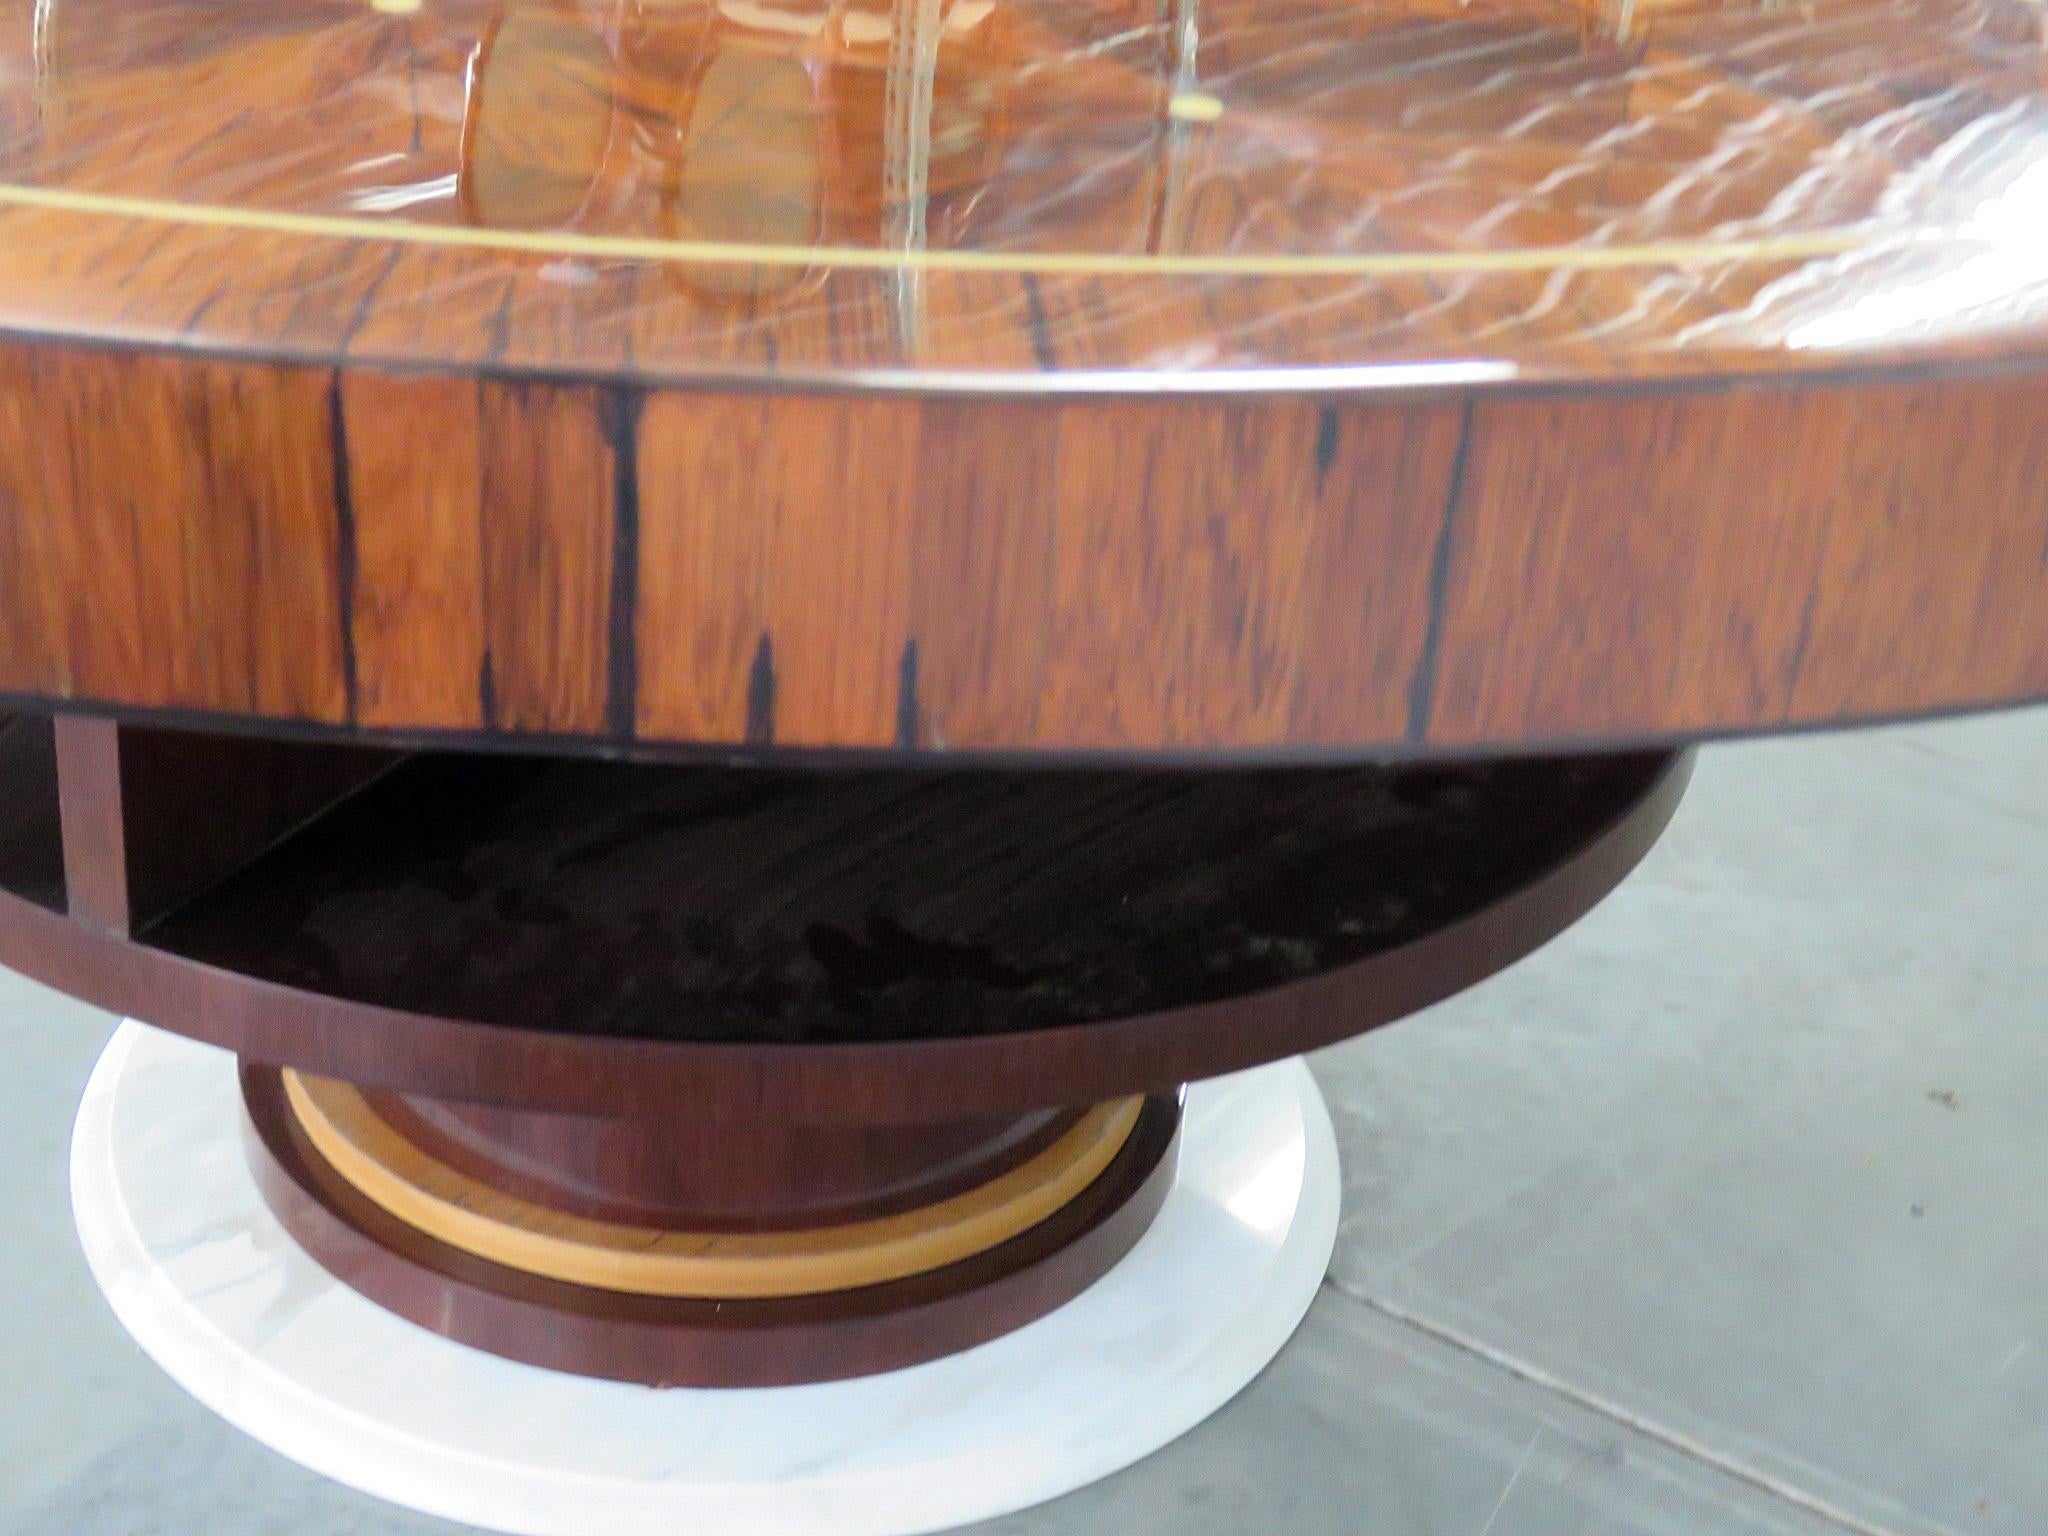 Rosewod Art Deco inlaid dining table with 4 shelves underneath and a marble base.